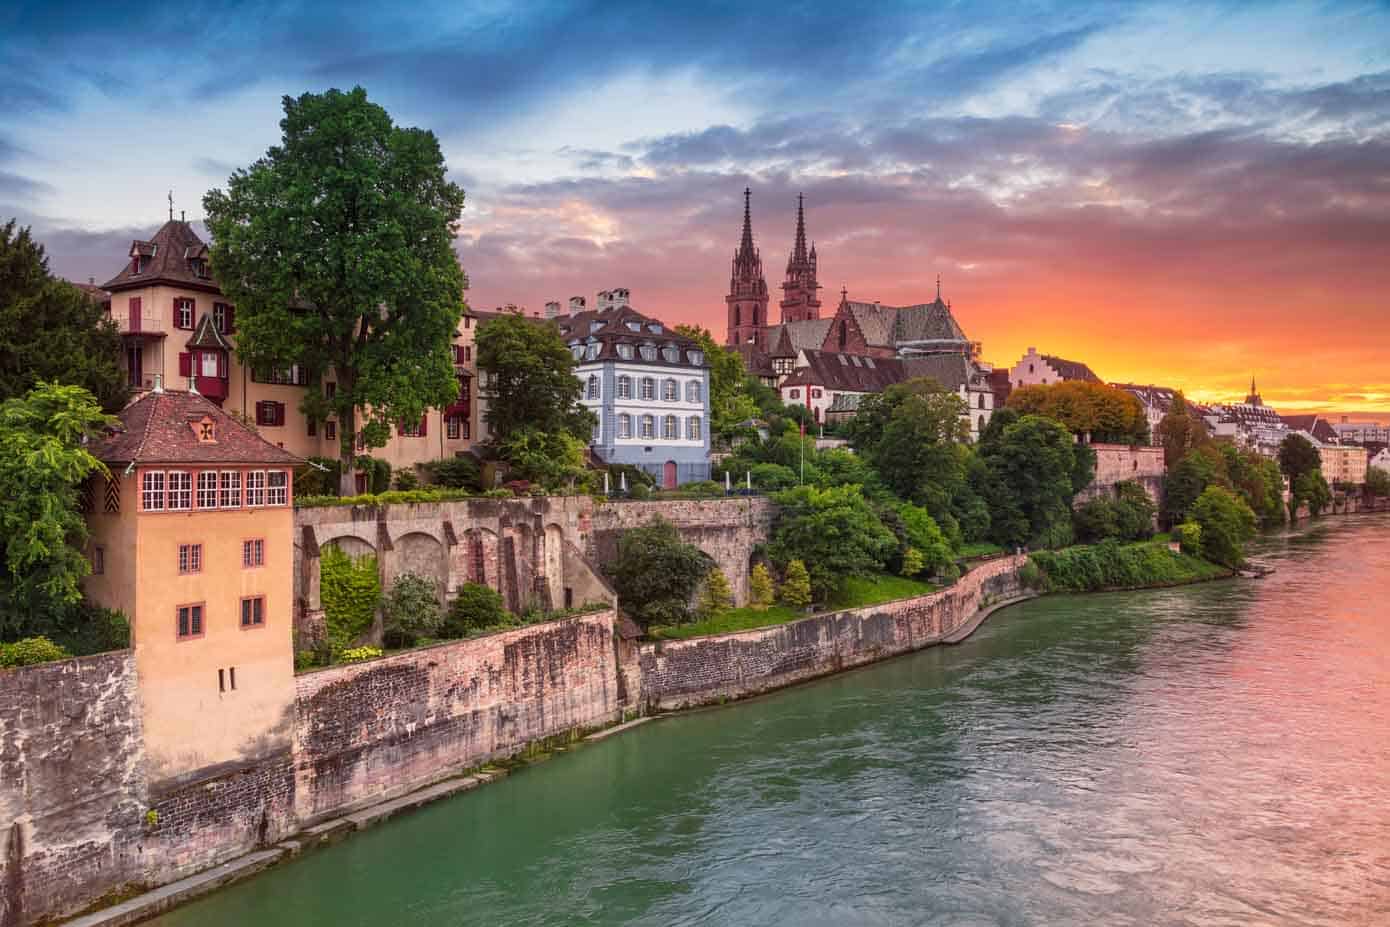 Old medieval style buildings along the Rhine River during sunset.